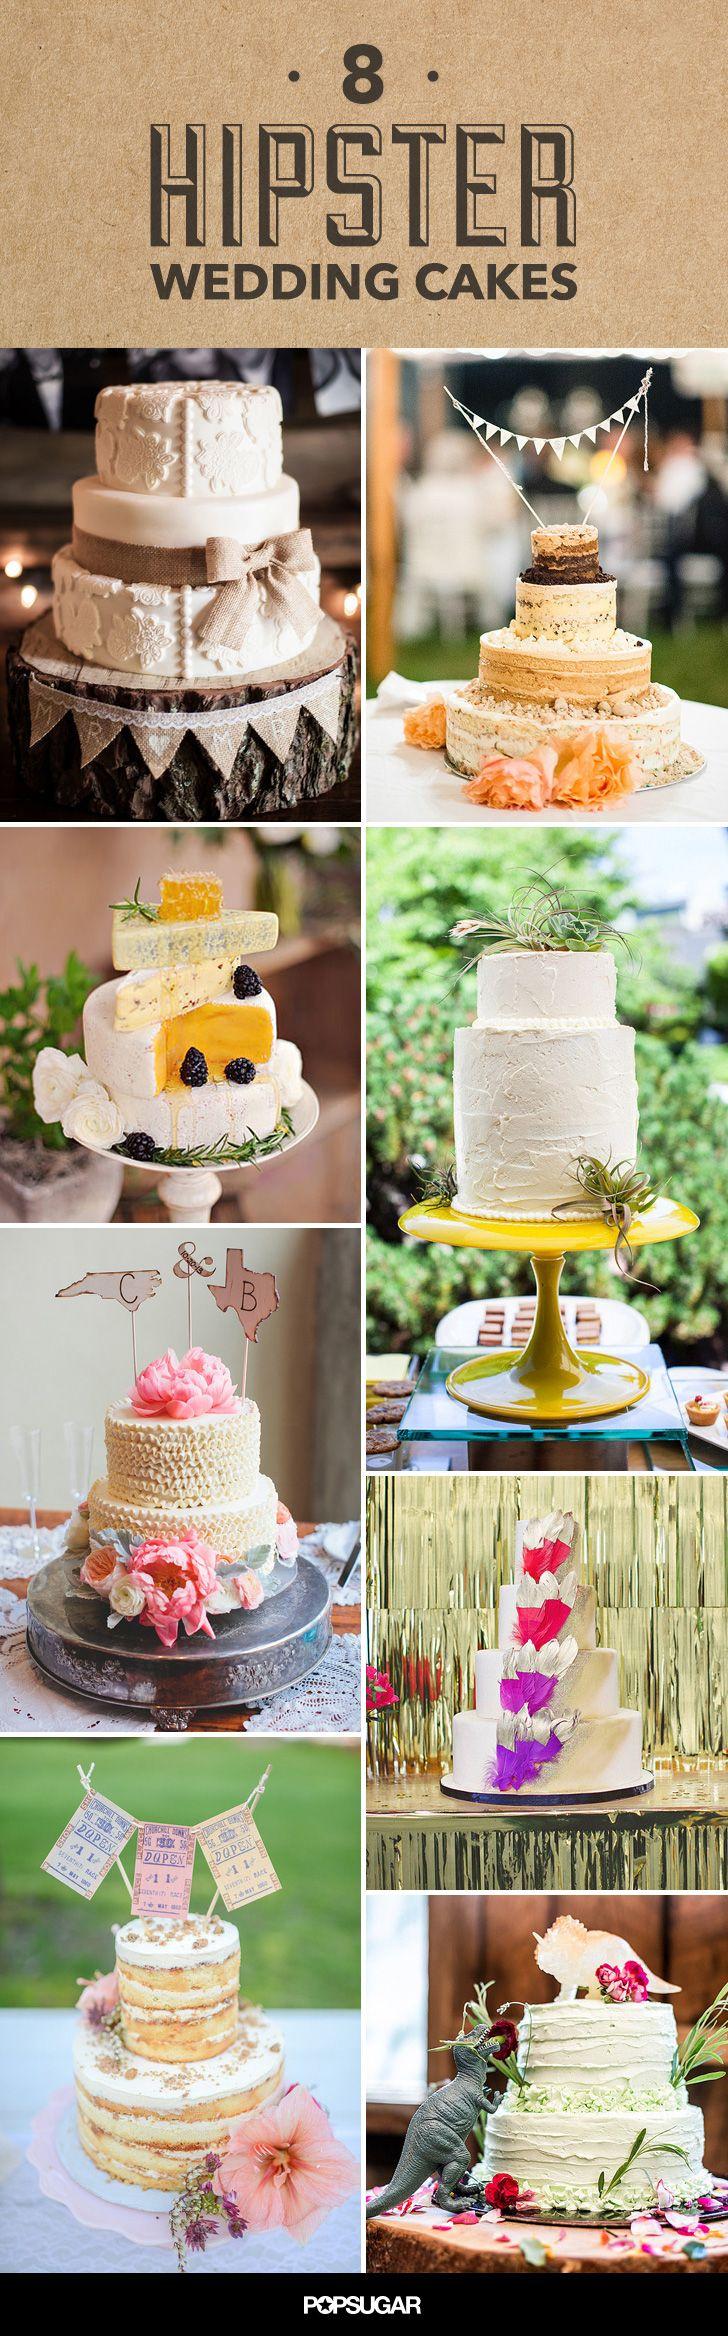 Wedding - These Hipster Wedding Cakes Are So Sweet